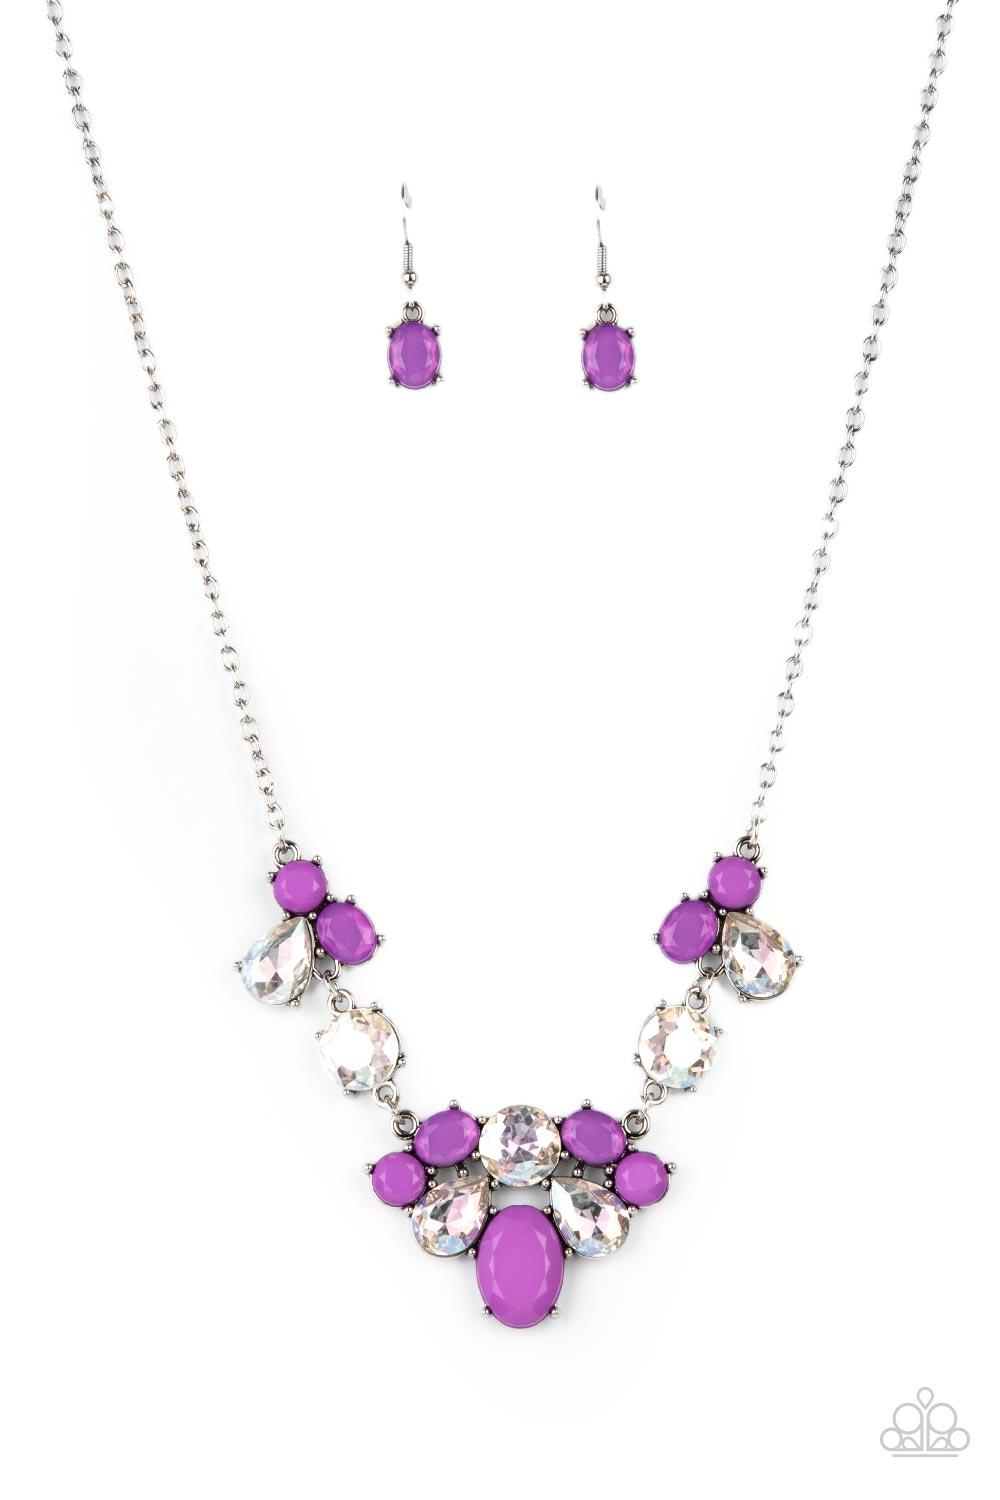 Ethereal Romance Necklace__Purple